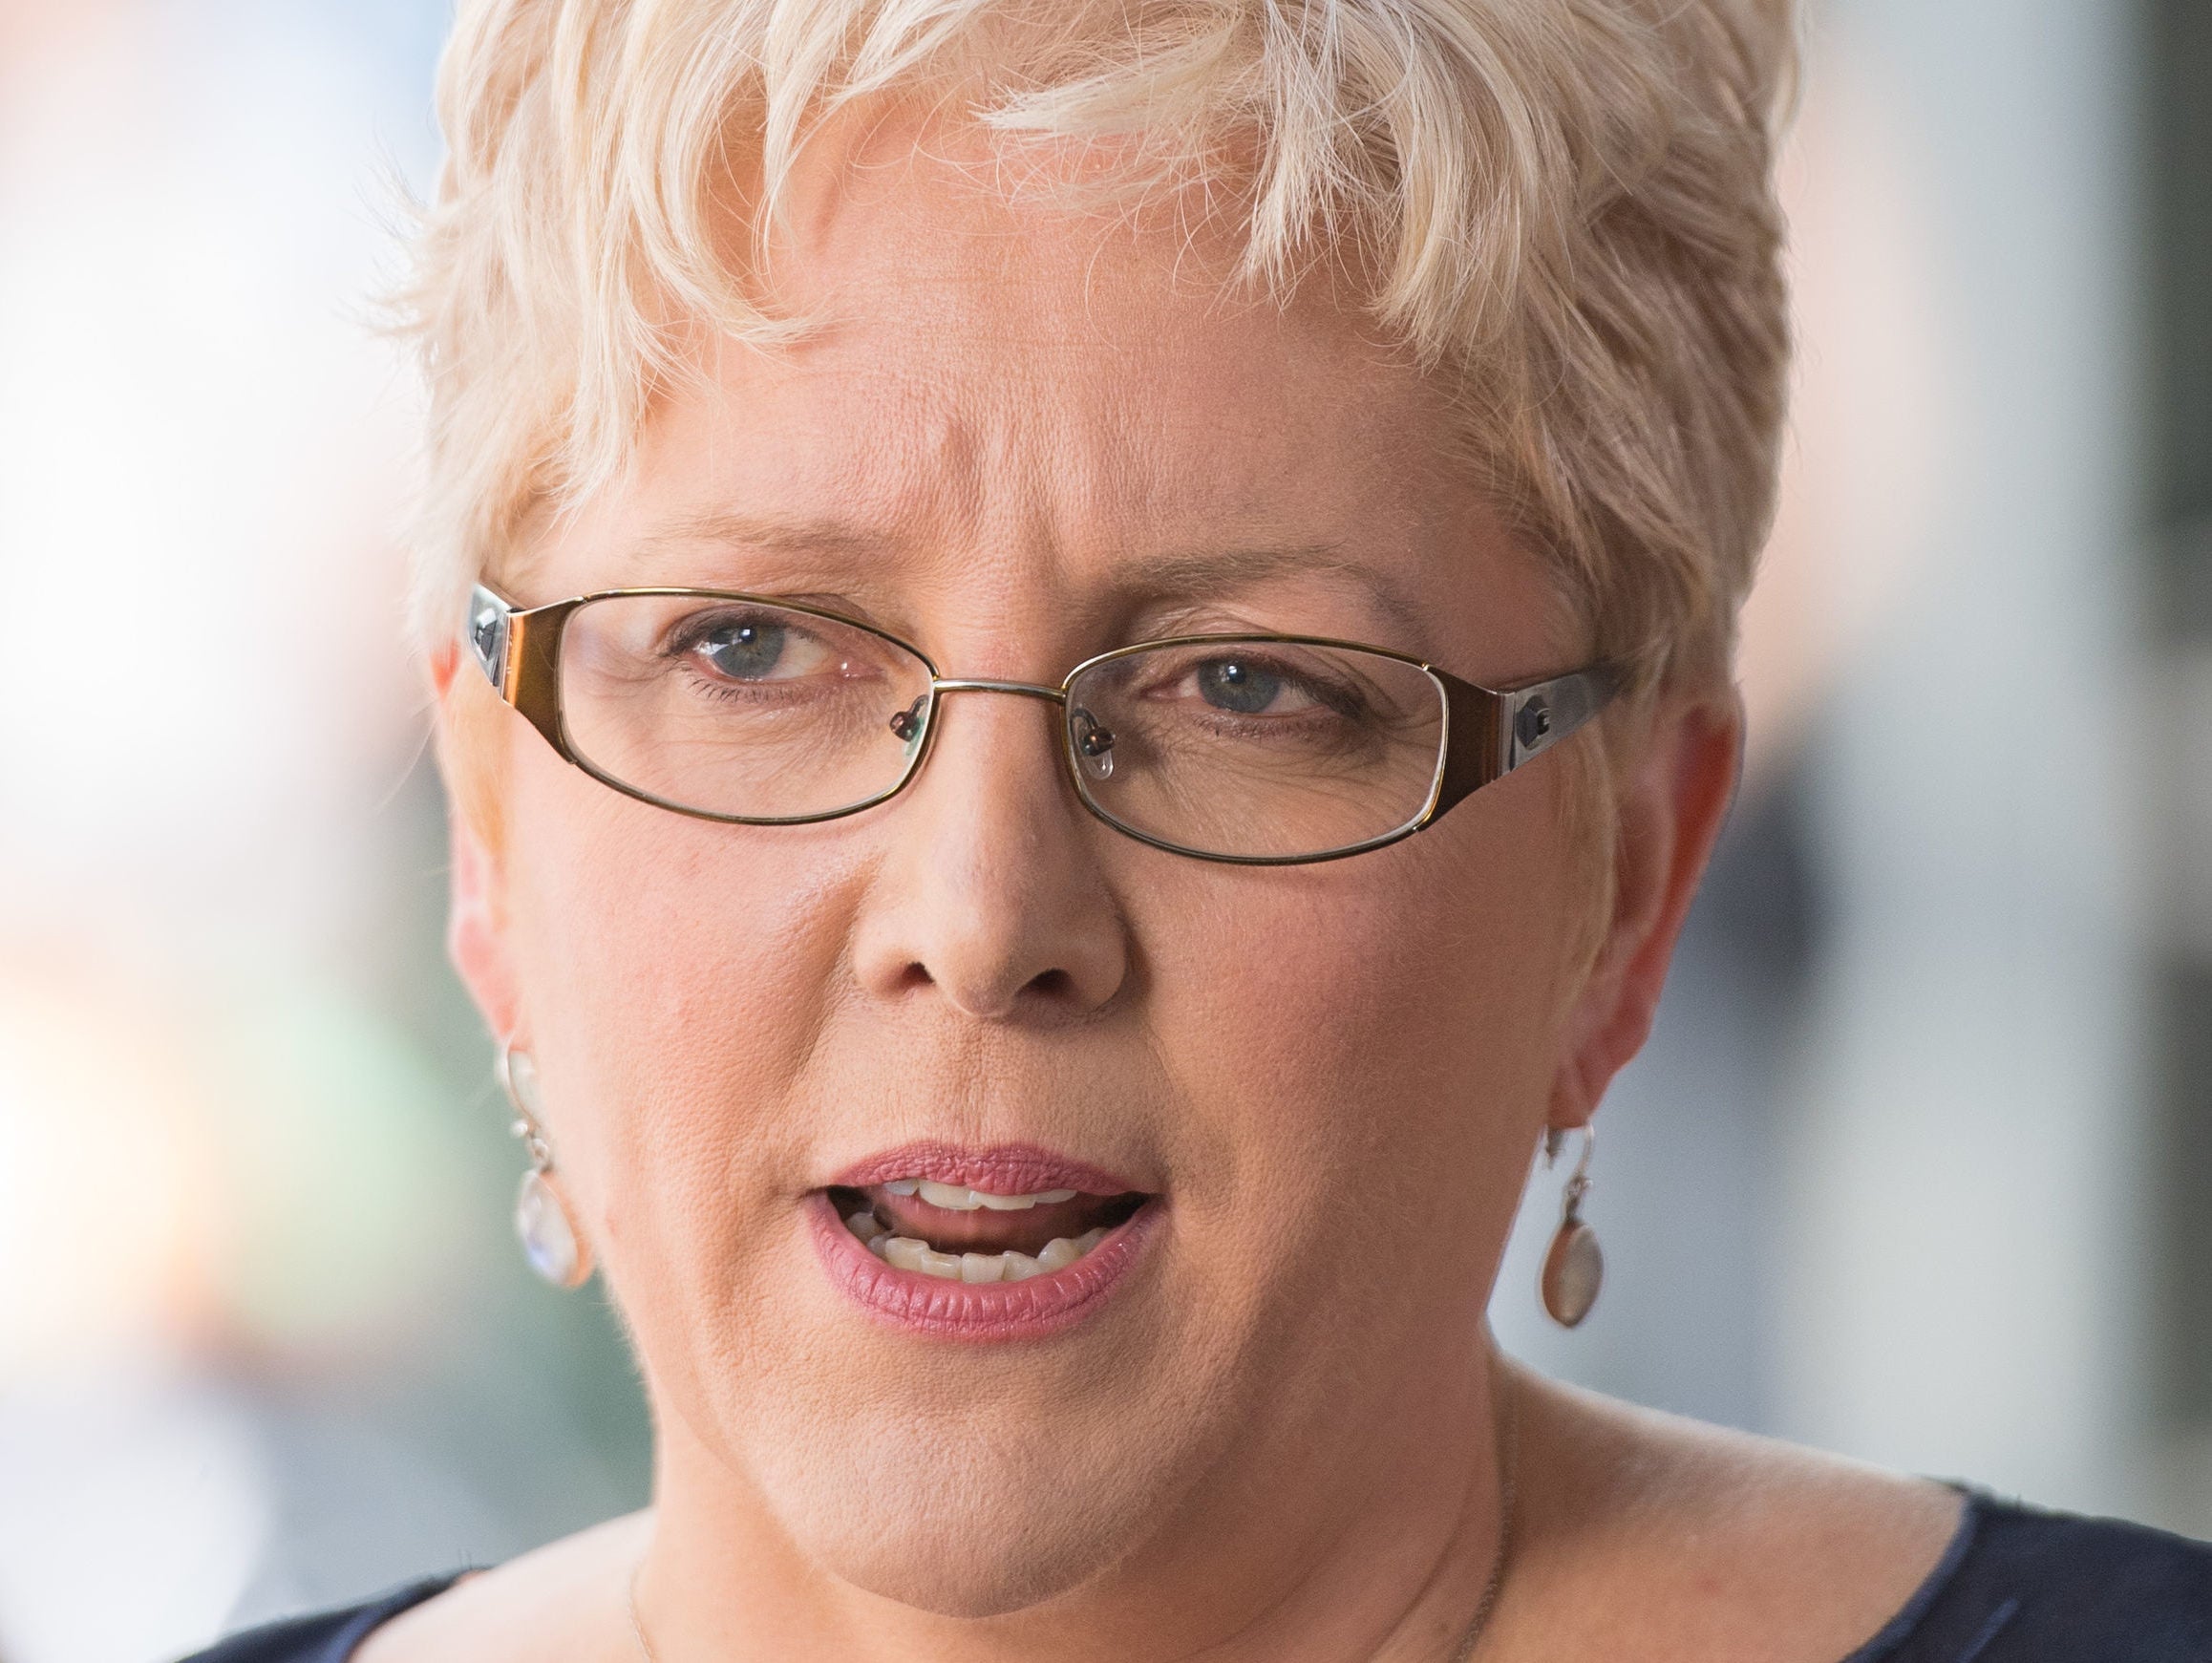 Former BBC China editor Carrie Gracie says battle for equal pay was 'worse than breast cancer'